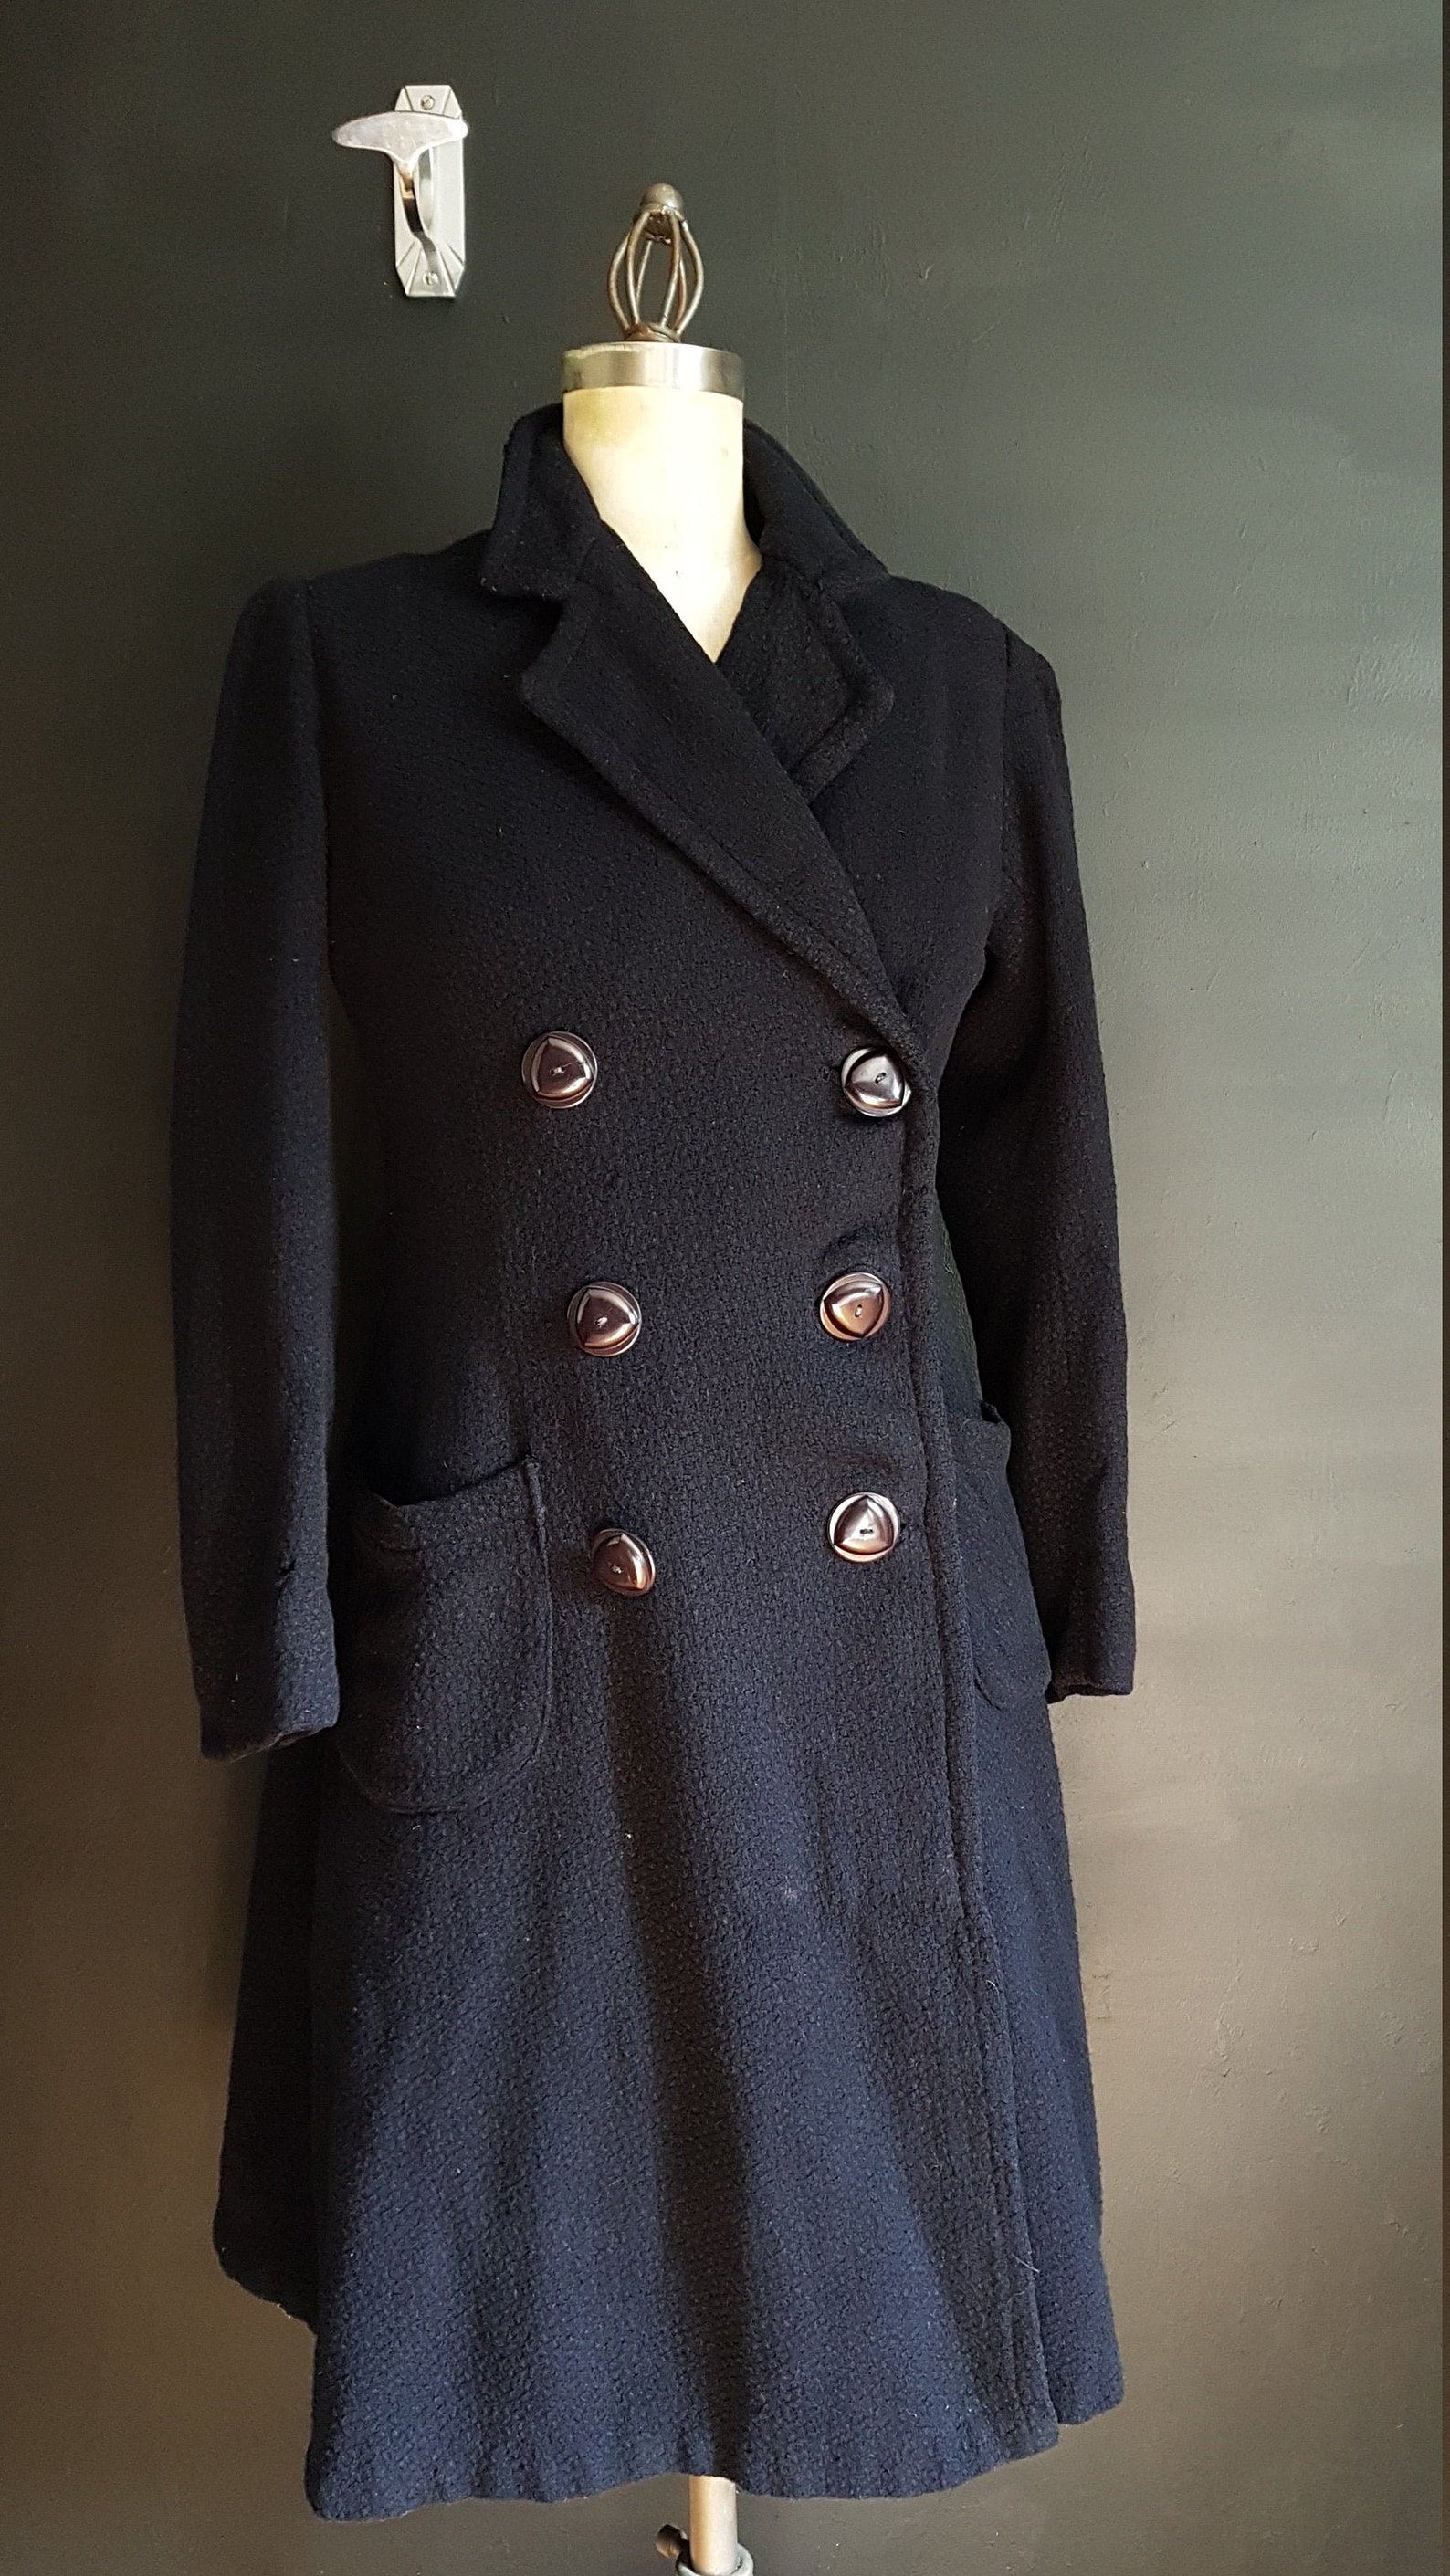 Vintage French tailored double breasted ladies overcoat coat. | Etsy